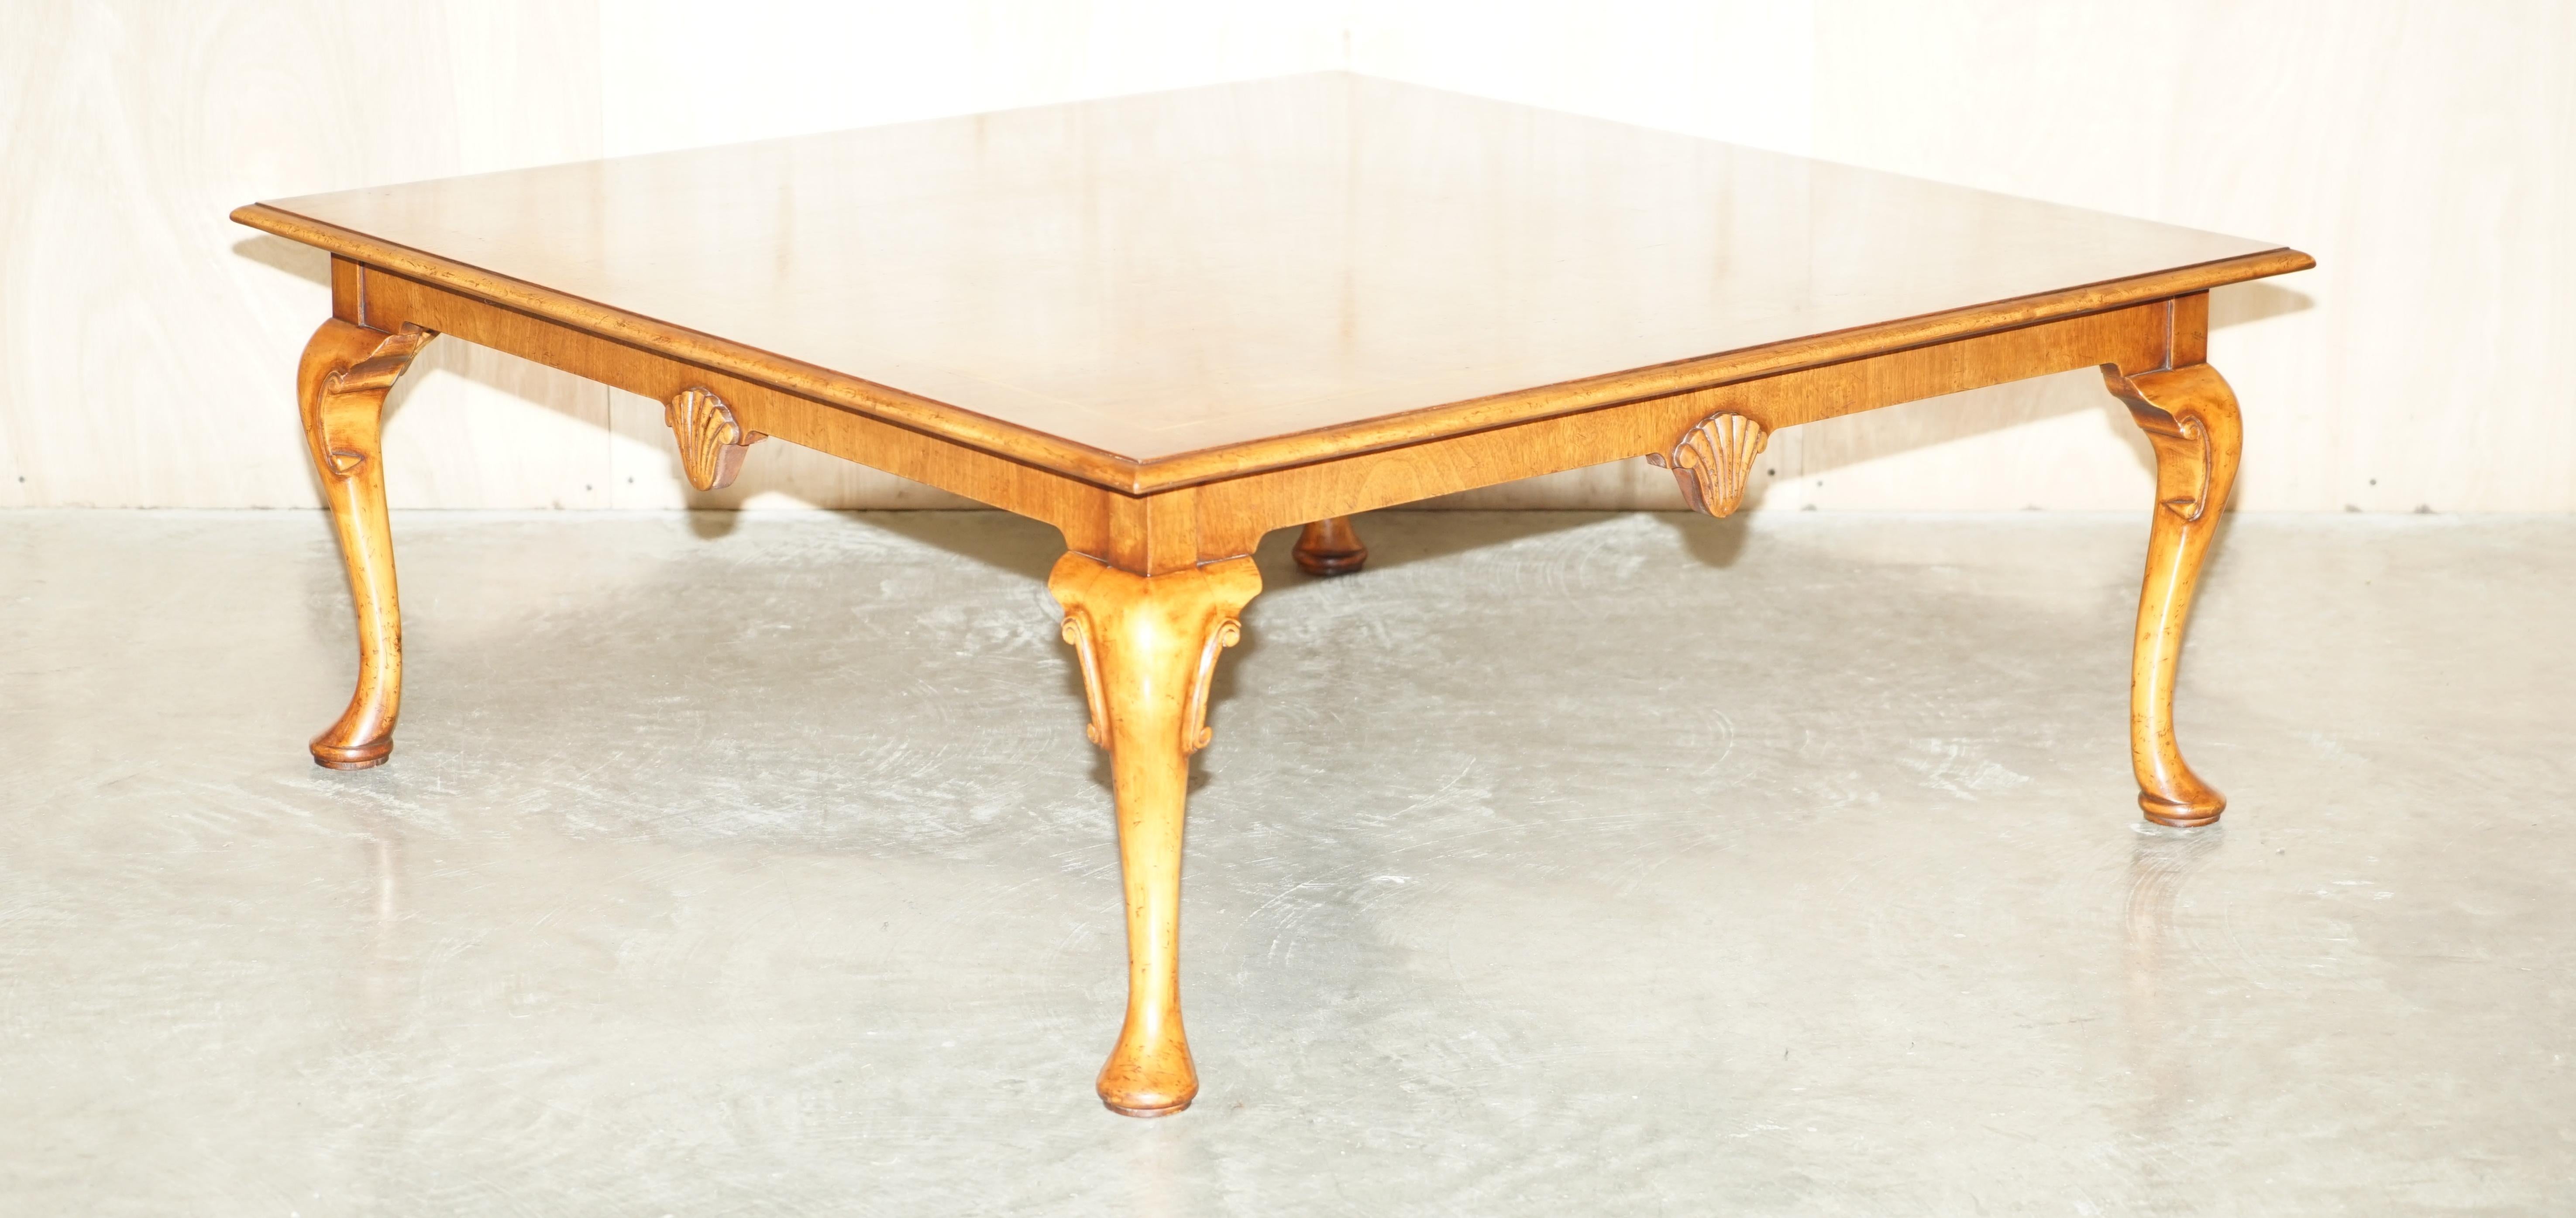 We are delighted to offer for sale this stunning Thomas Chippendale style vintage Burr Walnut coffee table with Elegant cabriolet legs.

A very decorative piece with a timber patina to die for, the Walnut is expertly cut and looks glorious in any